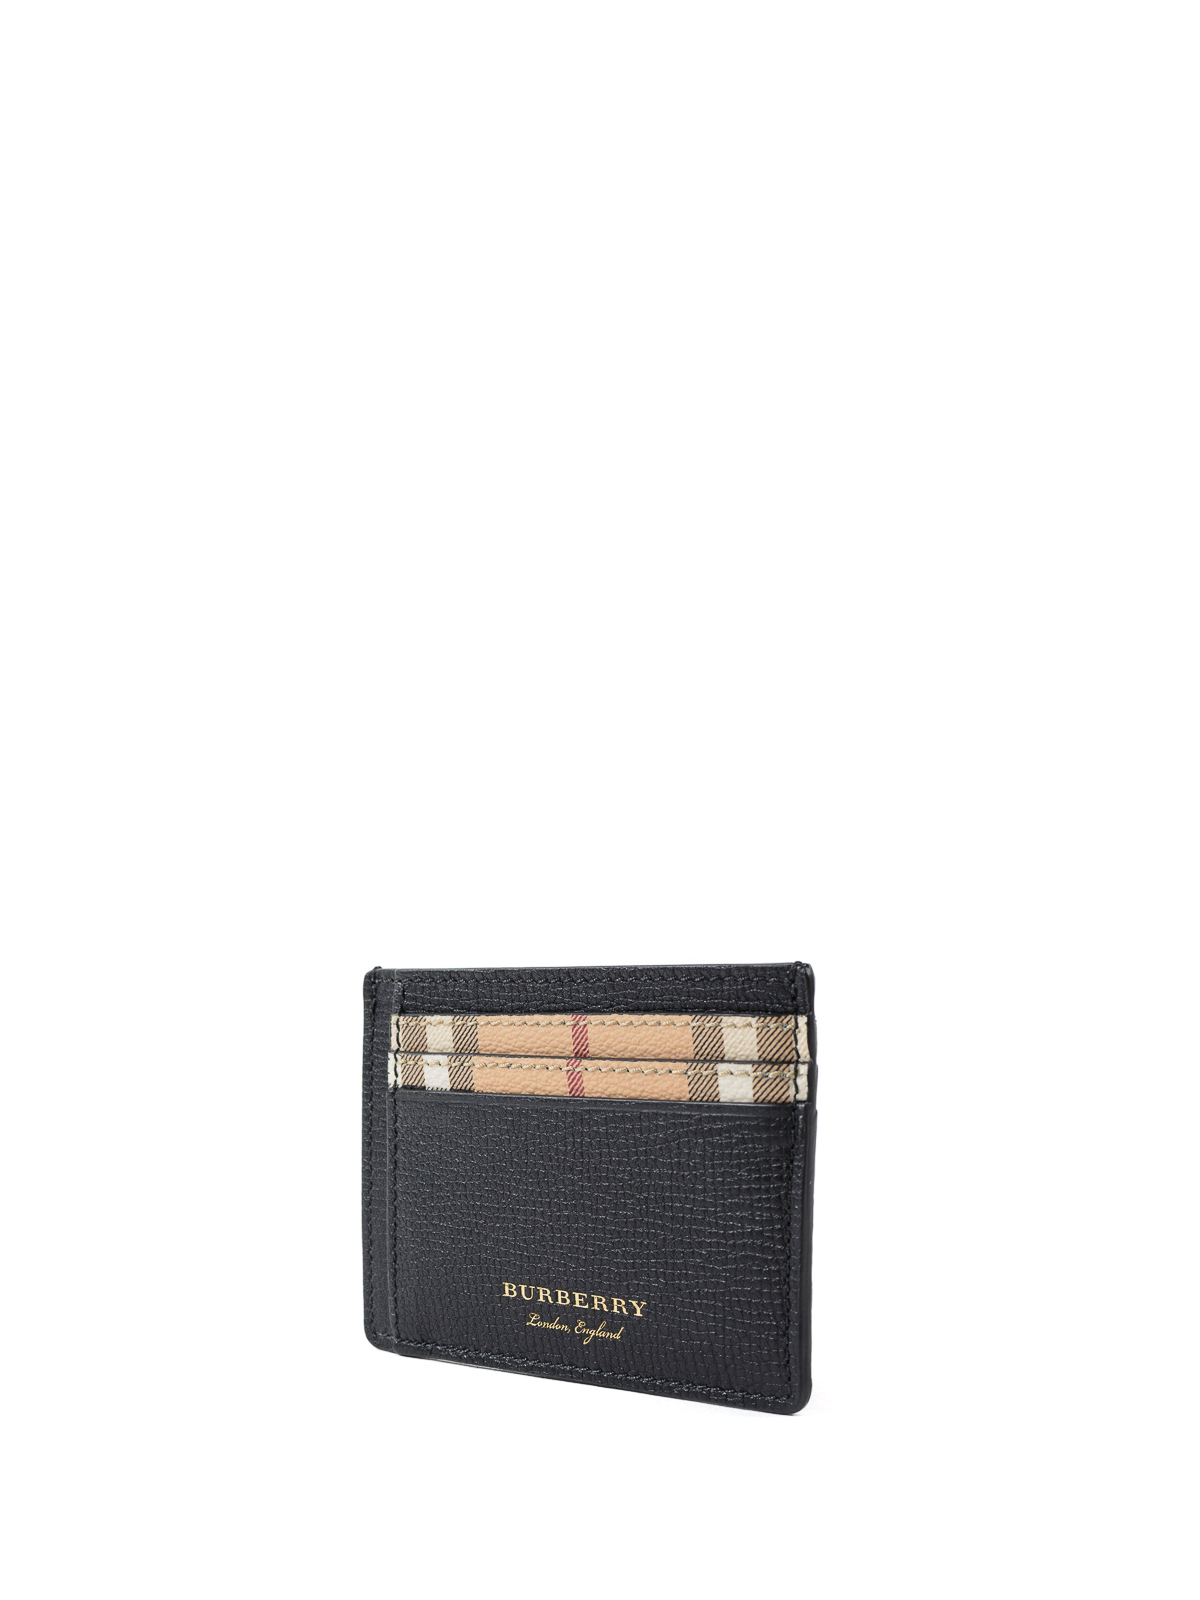 Burberry Check and Leather Card Case